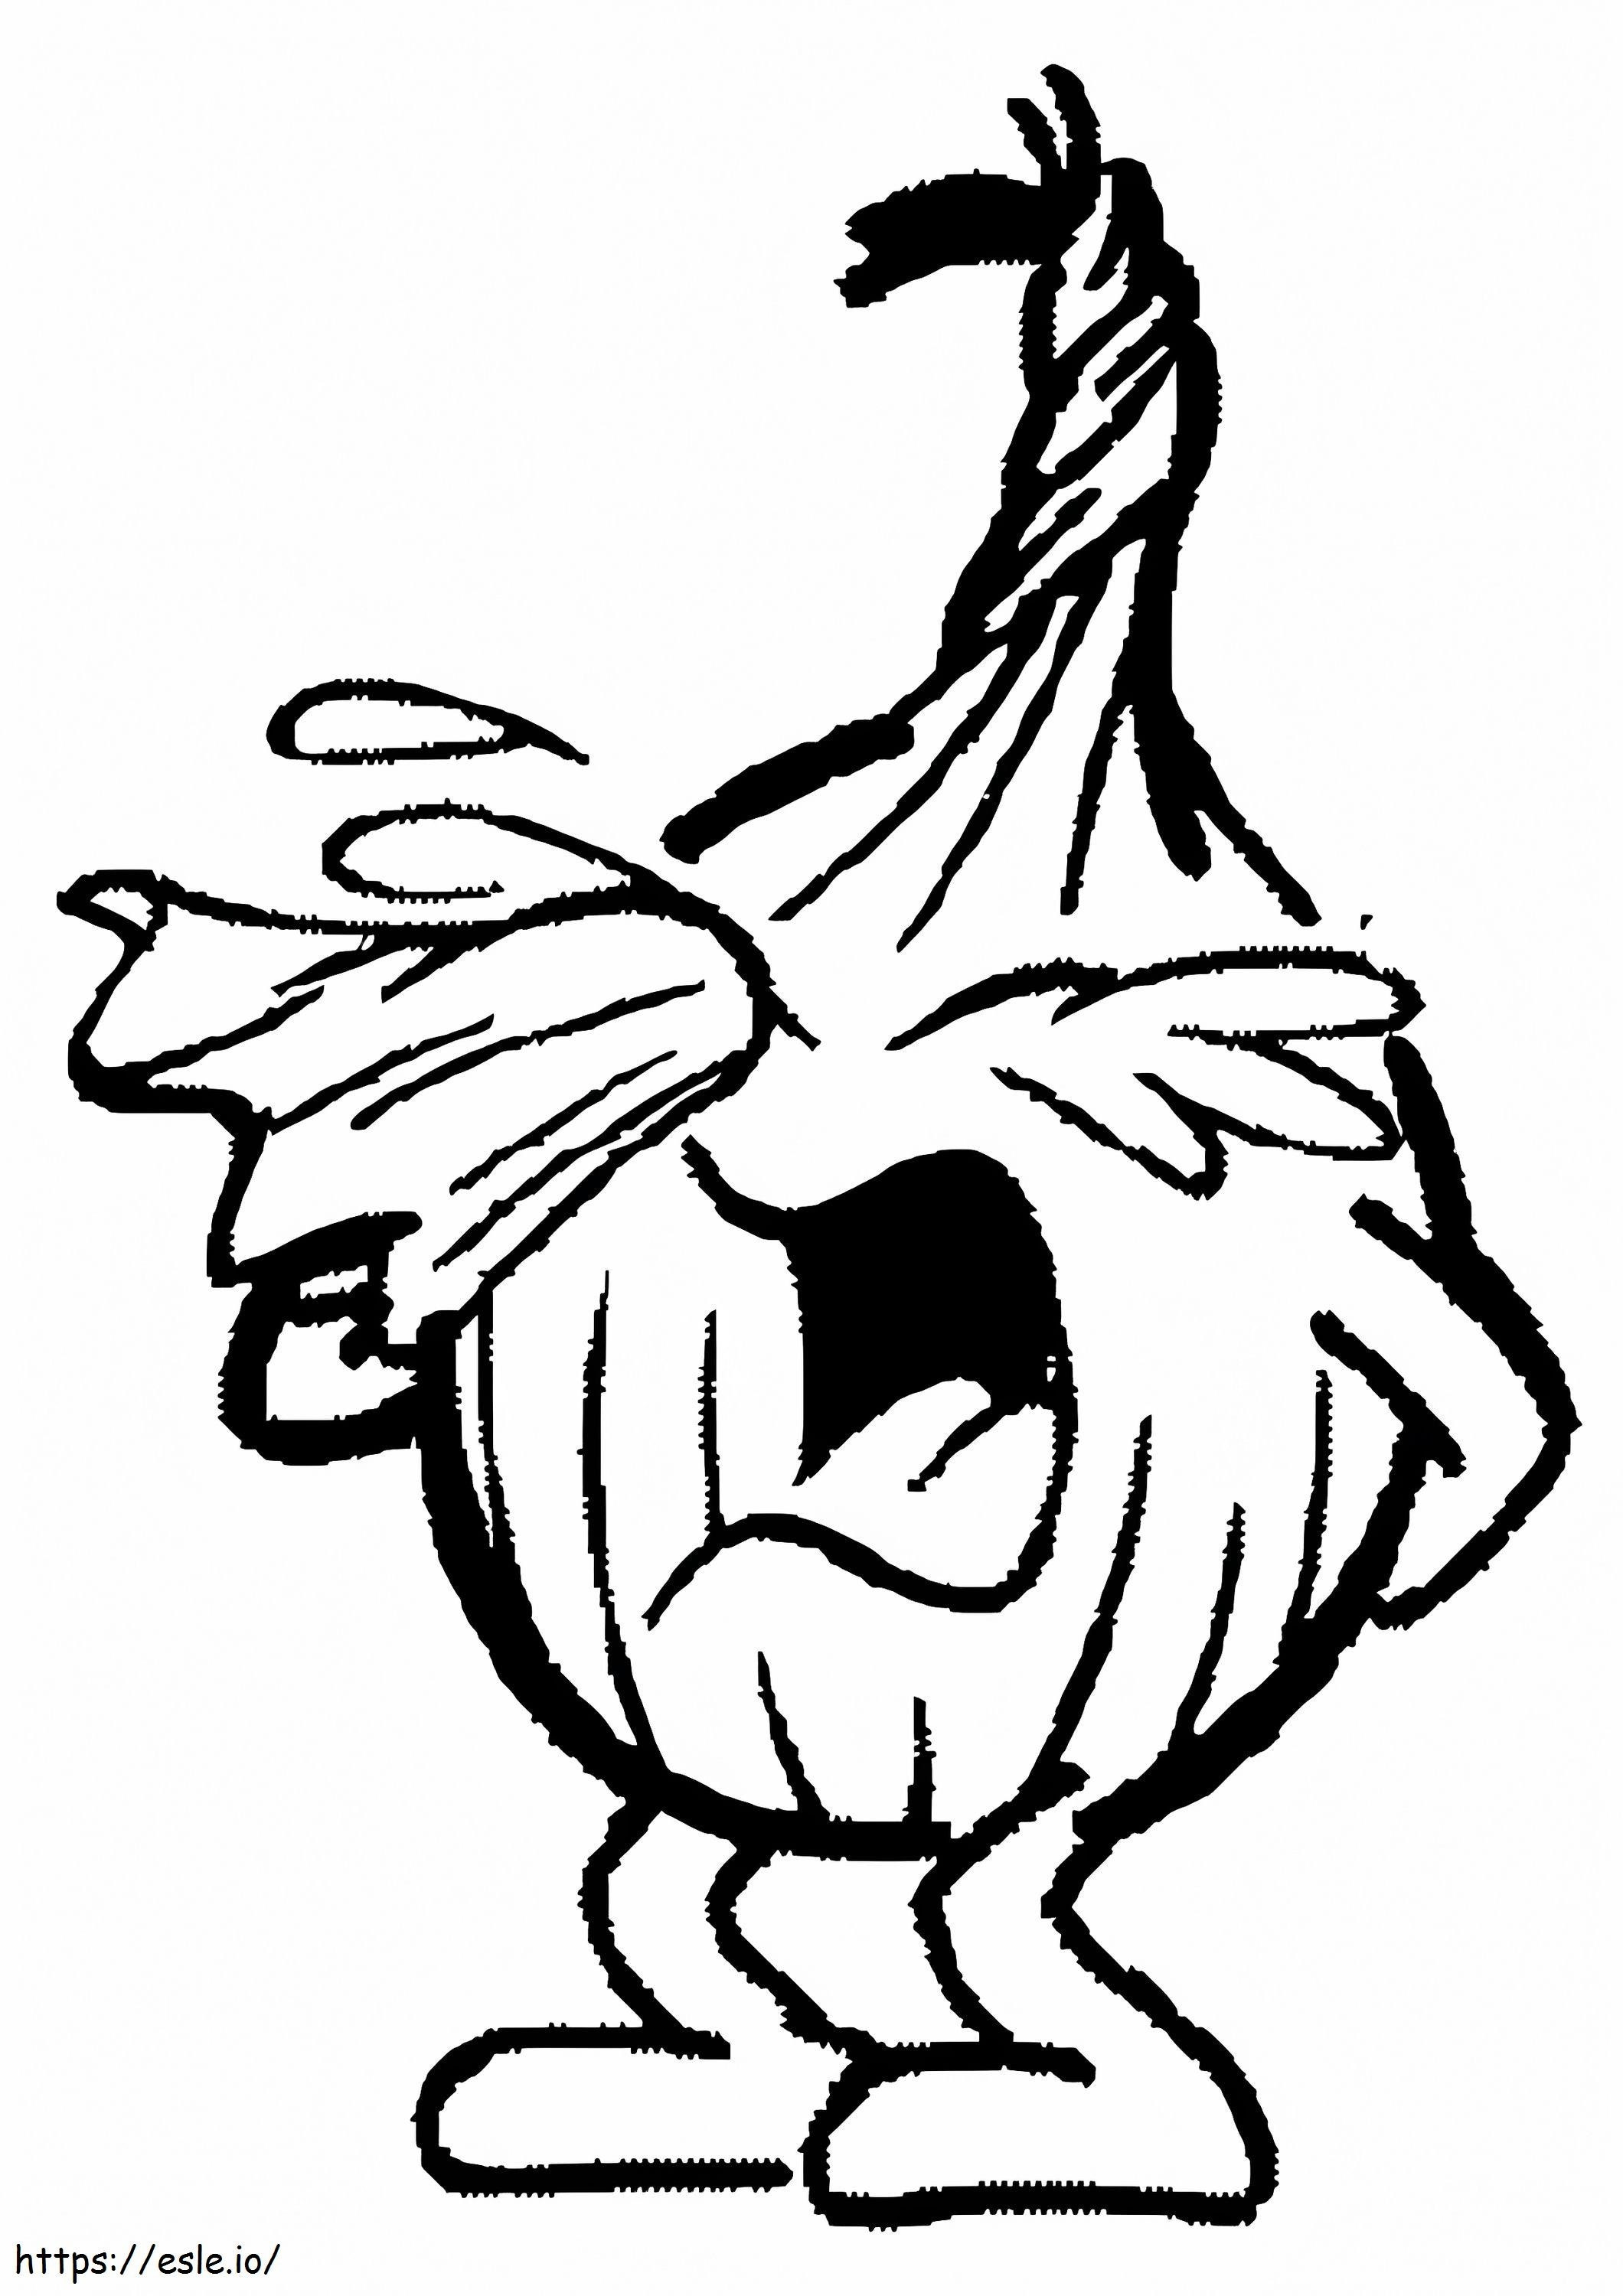 1528363321 Crying Onion A4 coloring page